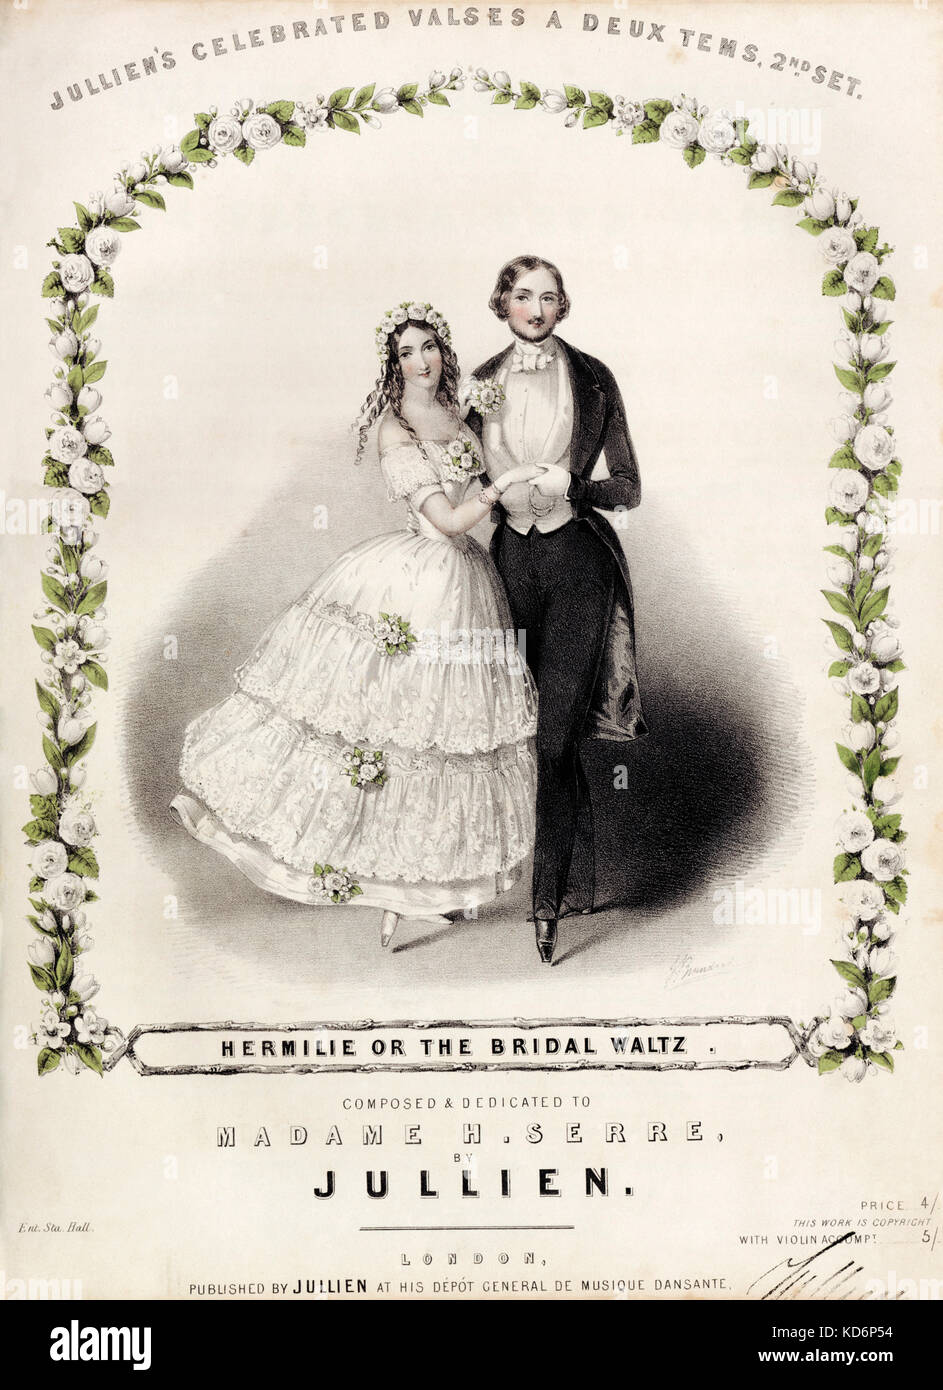 Queen Victoria and Prince Albert wedding dance. Called 'Hermilie or the  Bridal Waltz' because disrespectful to refer directly to the Queen.Published,  London, Julien, before 1846 - around time of Victoria 's accession